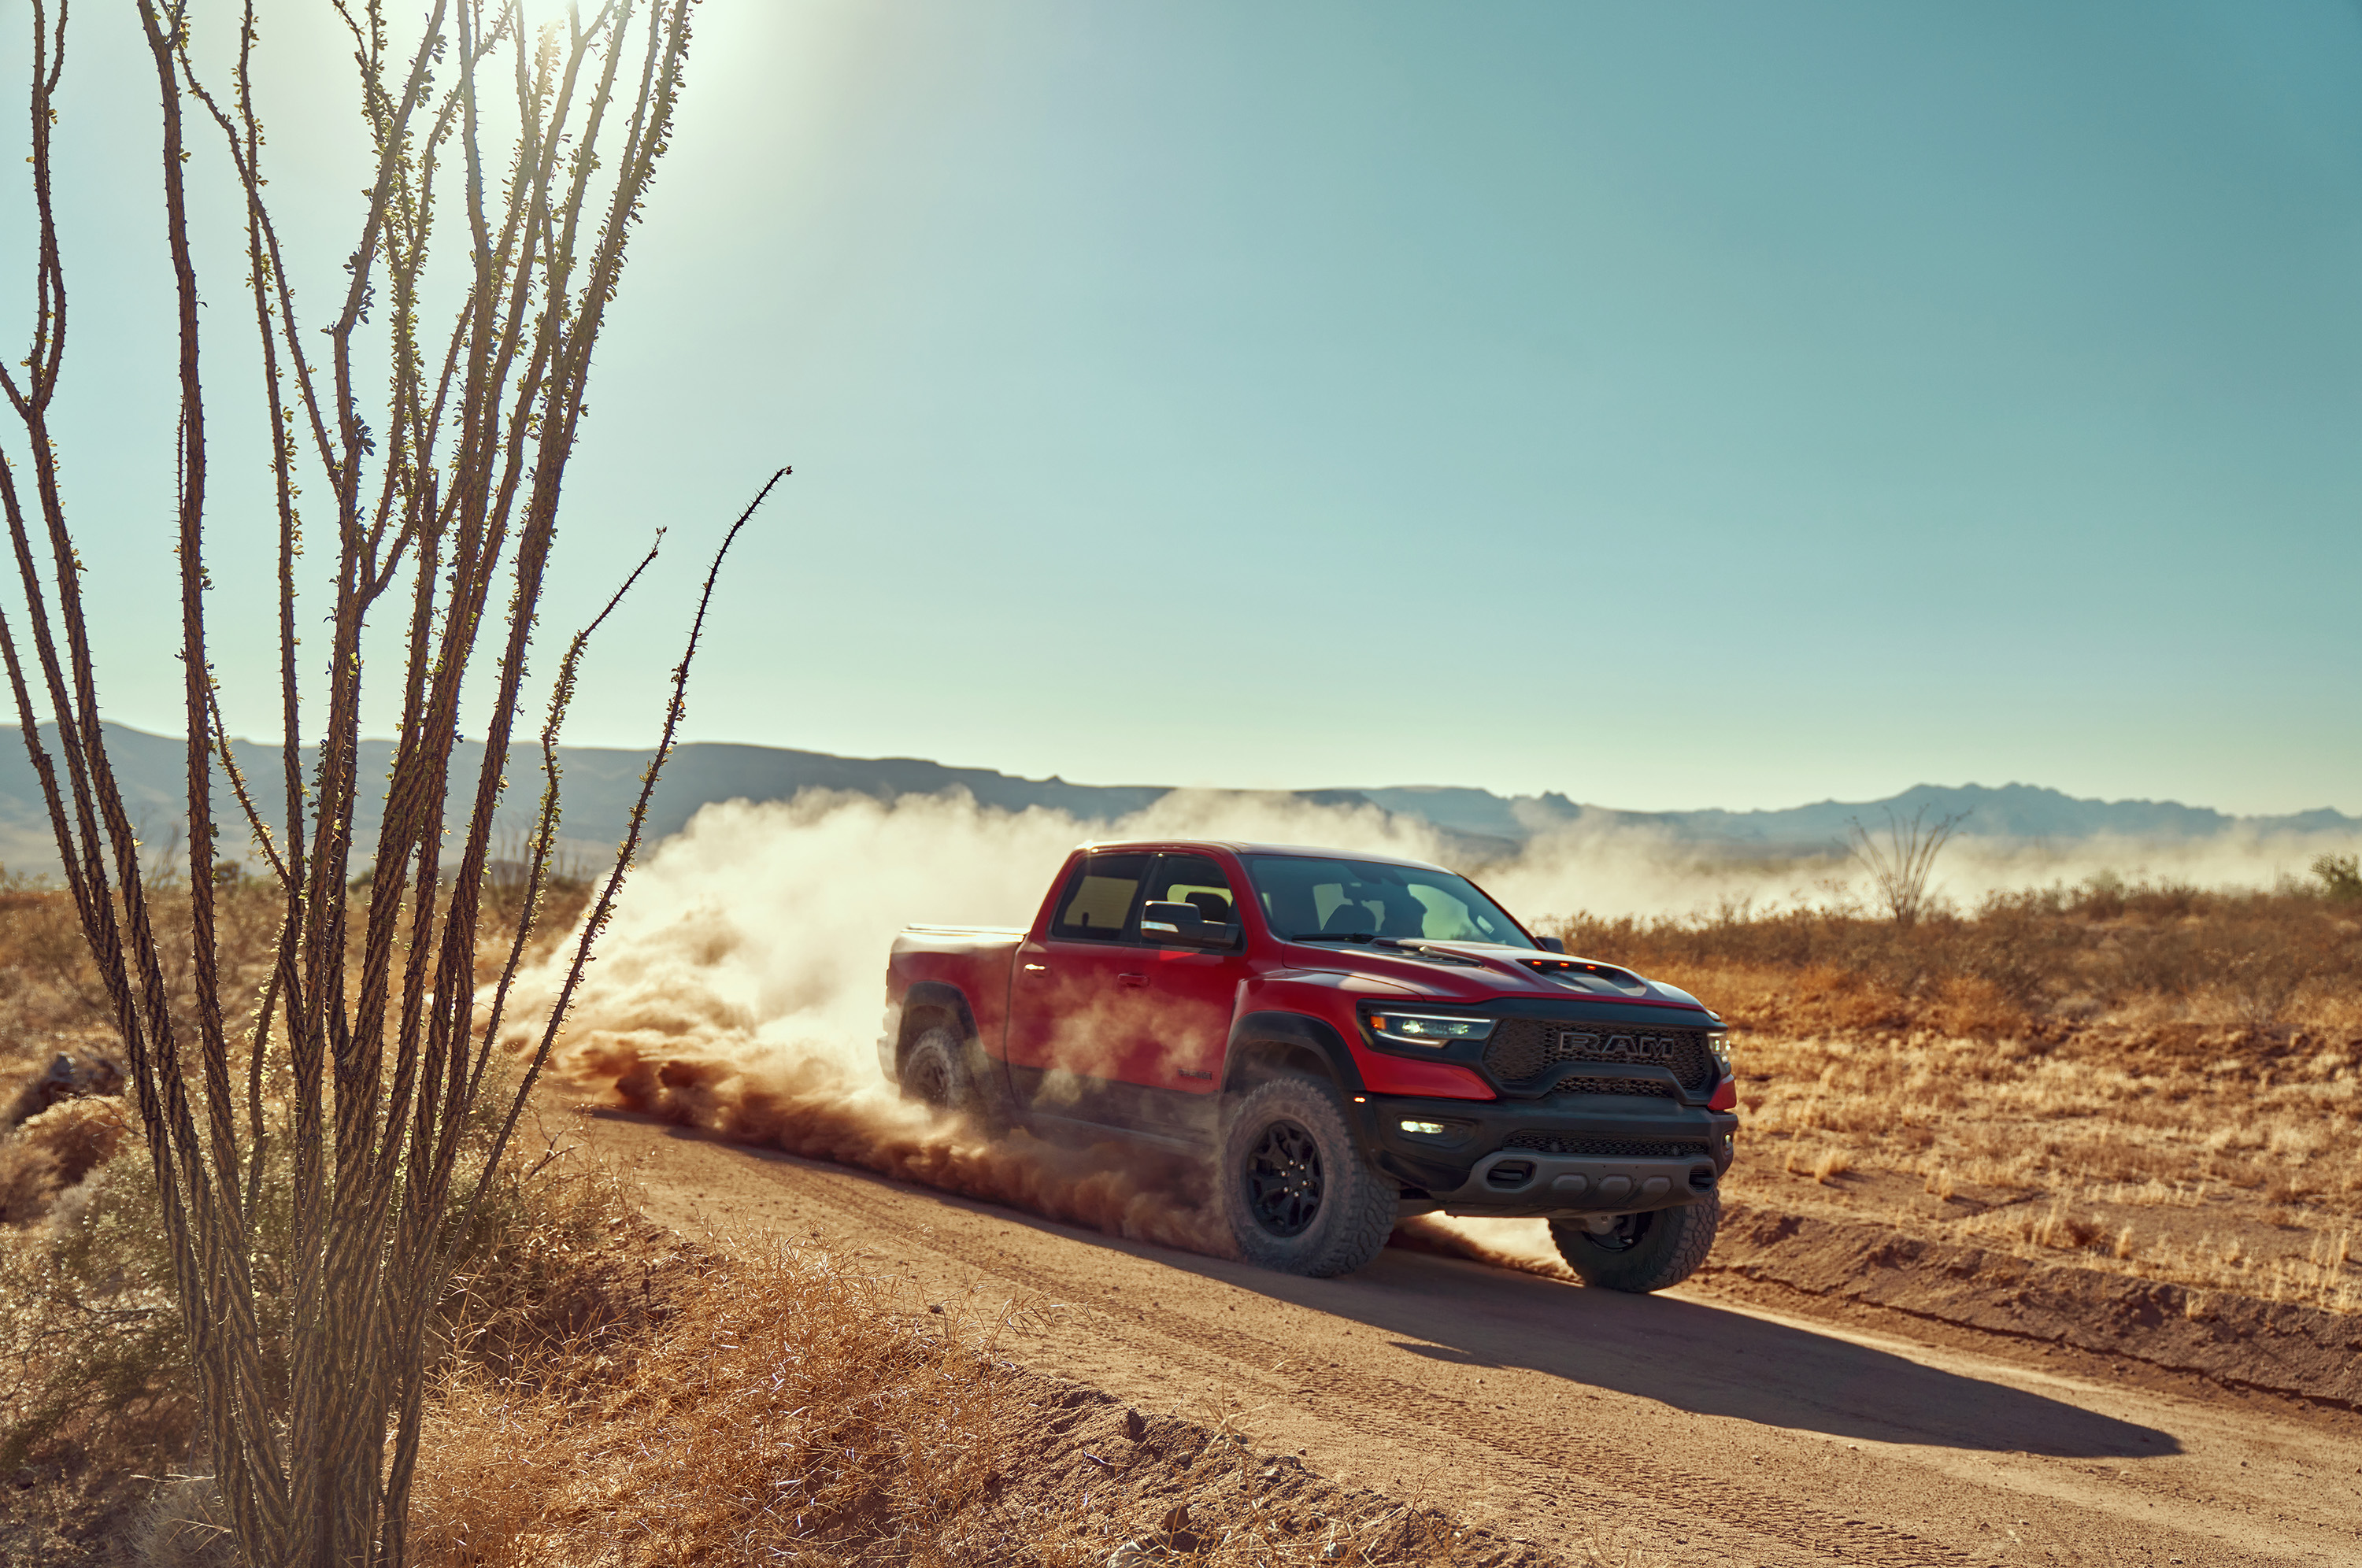 2021 Ram 1500 Lassos Top Honor as ’Truck of Texas’ for Third Consecutive Year by the Texas Auto Writers Association